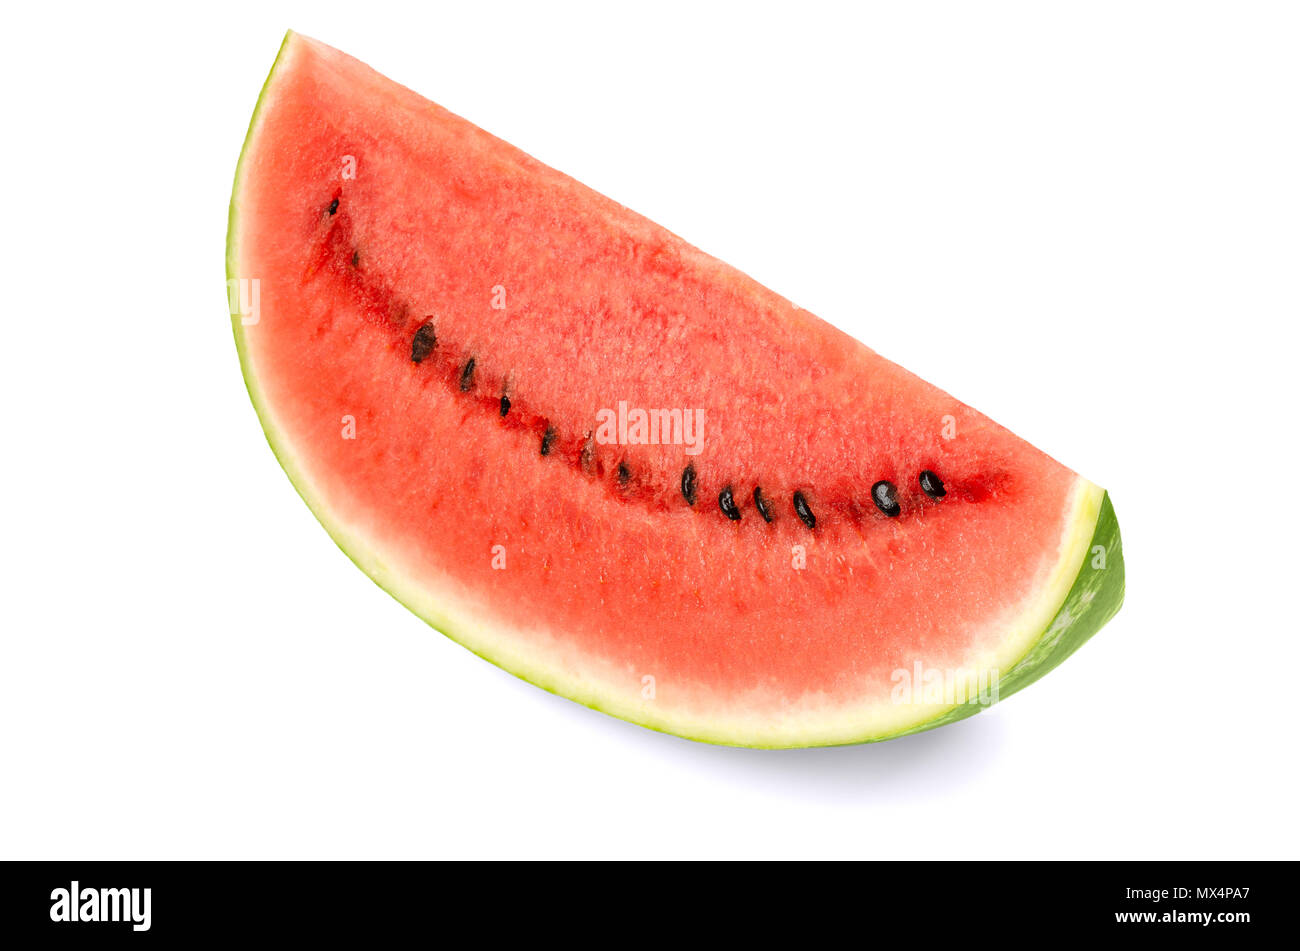 Sweet watermelon slice, front view, on white background. Large ripe fruit of Citrullus lanatus with green striped skin, red pulp and black seeds. Stock Photo